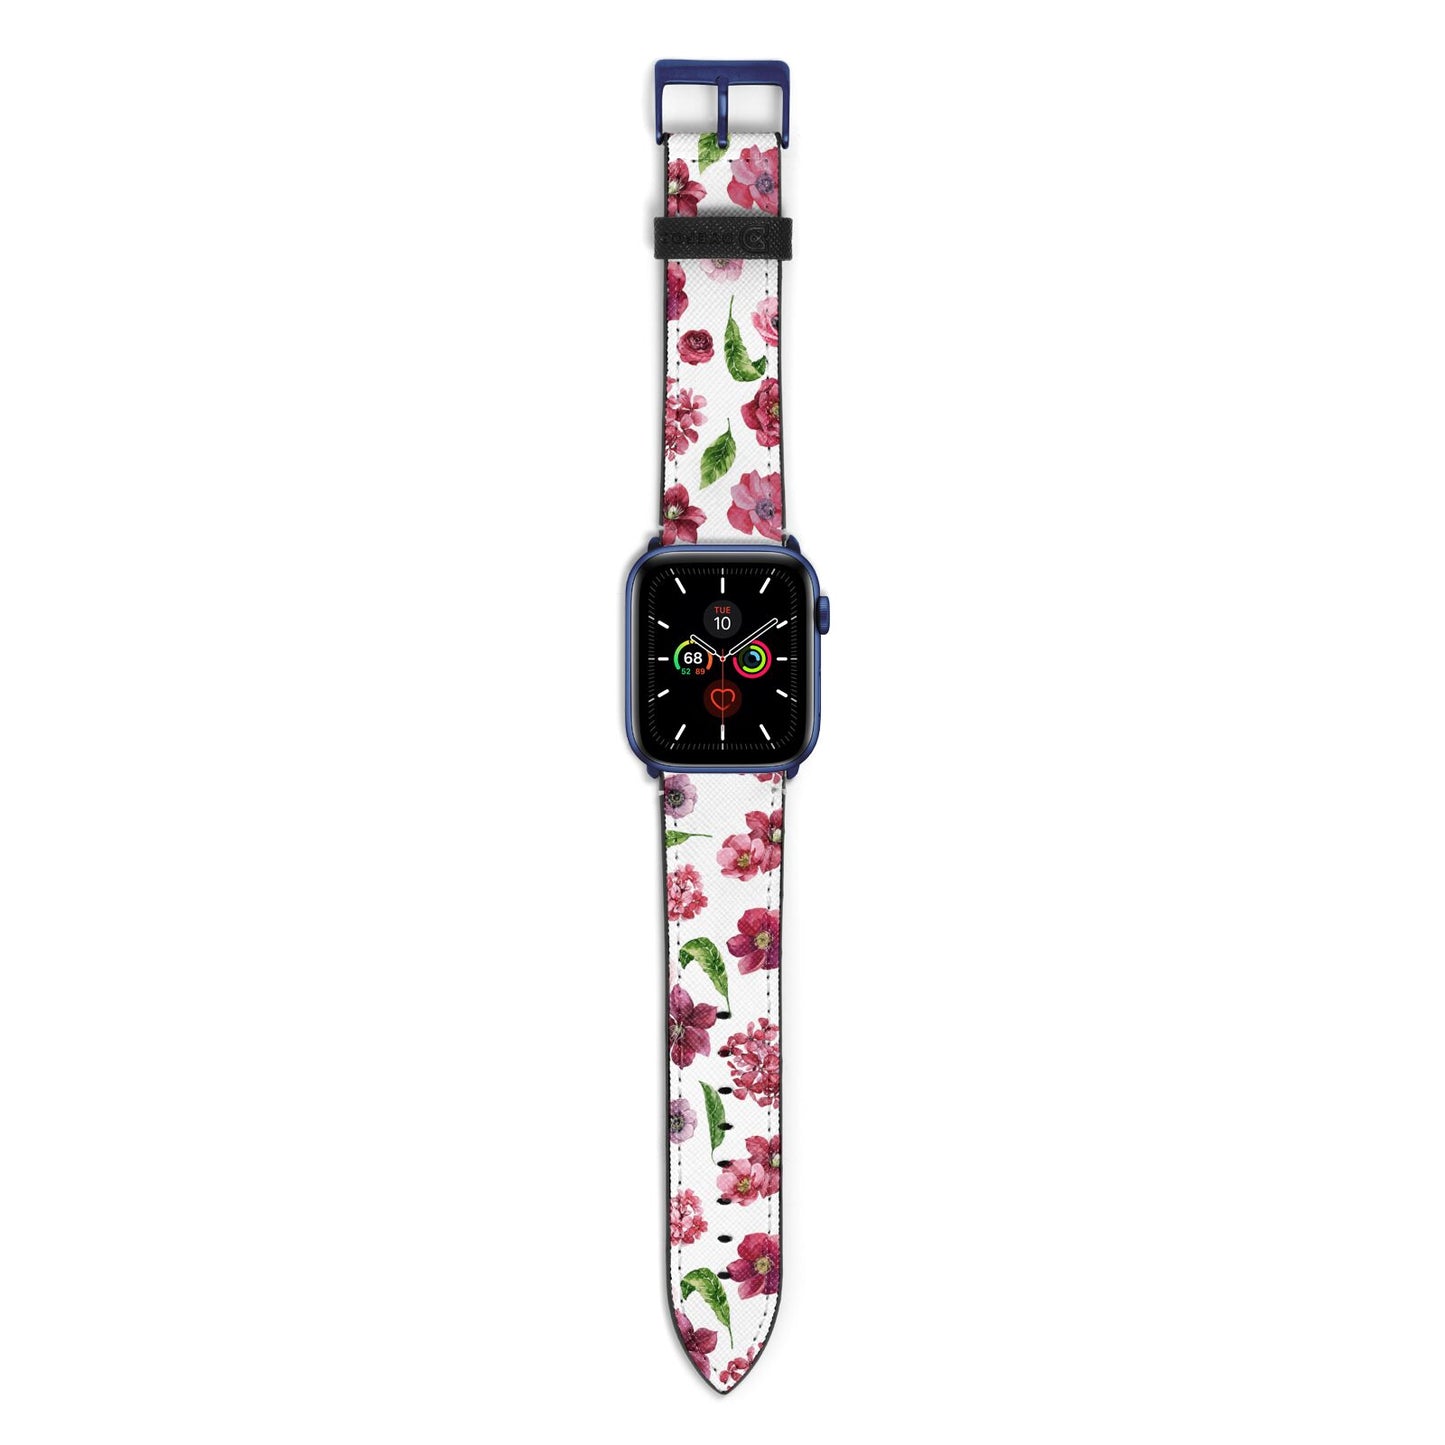 Pink Floral Apple Watch Strap with Blue Hardware